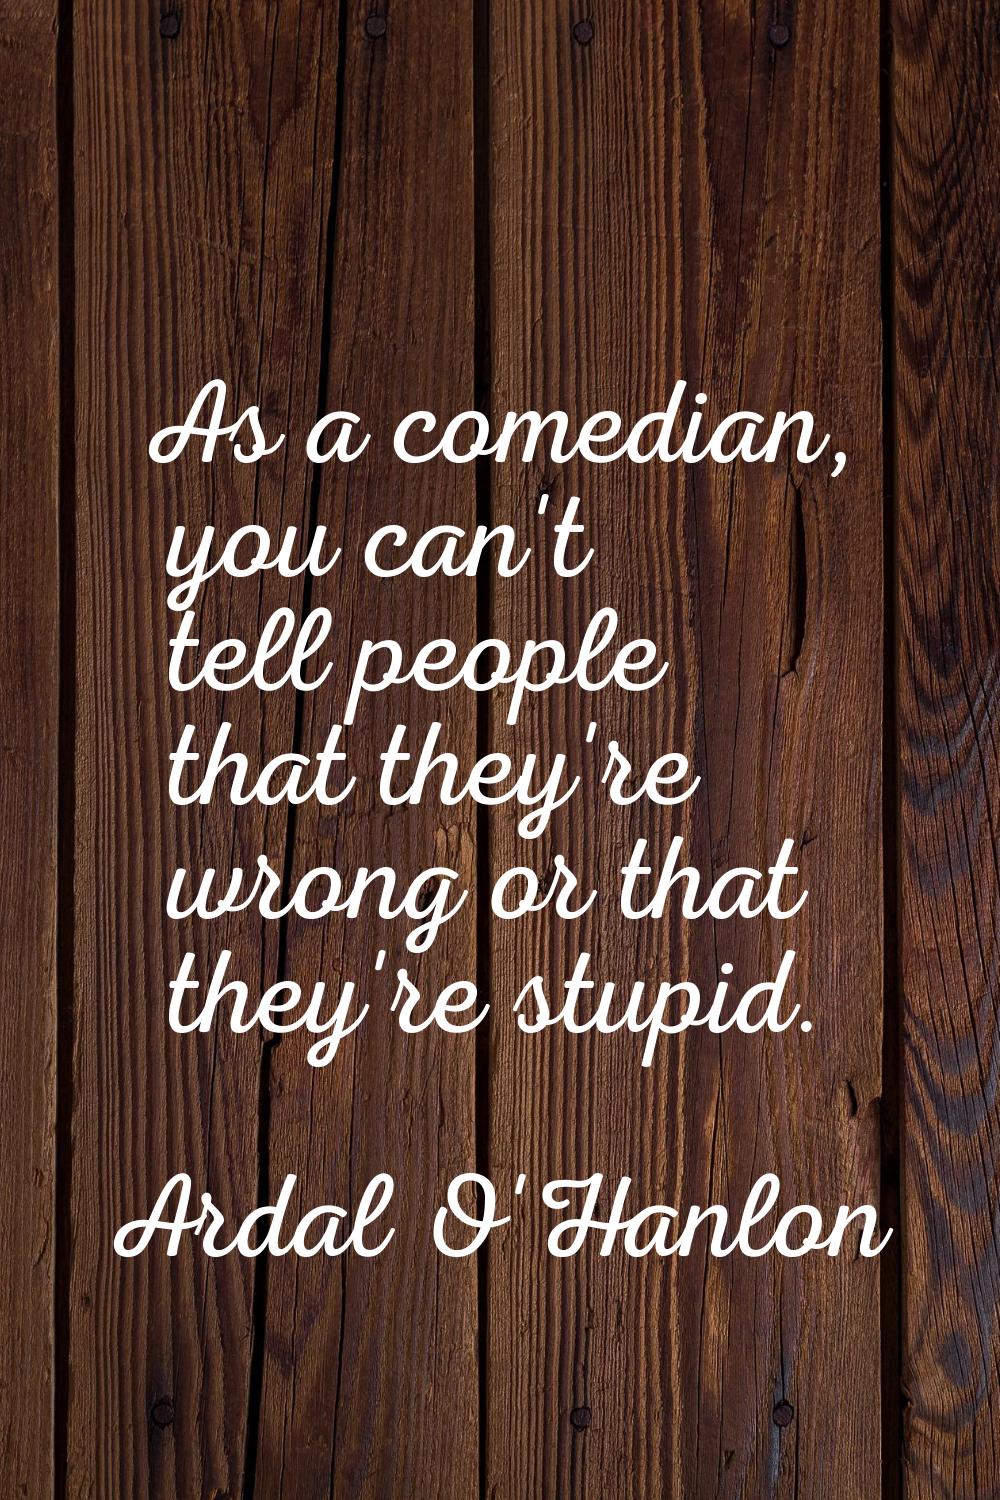 As a comedian, you can't tell people that they're wrong or that they're stupid.